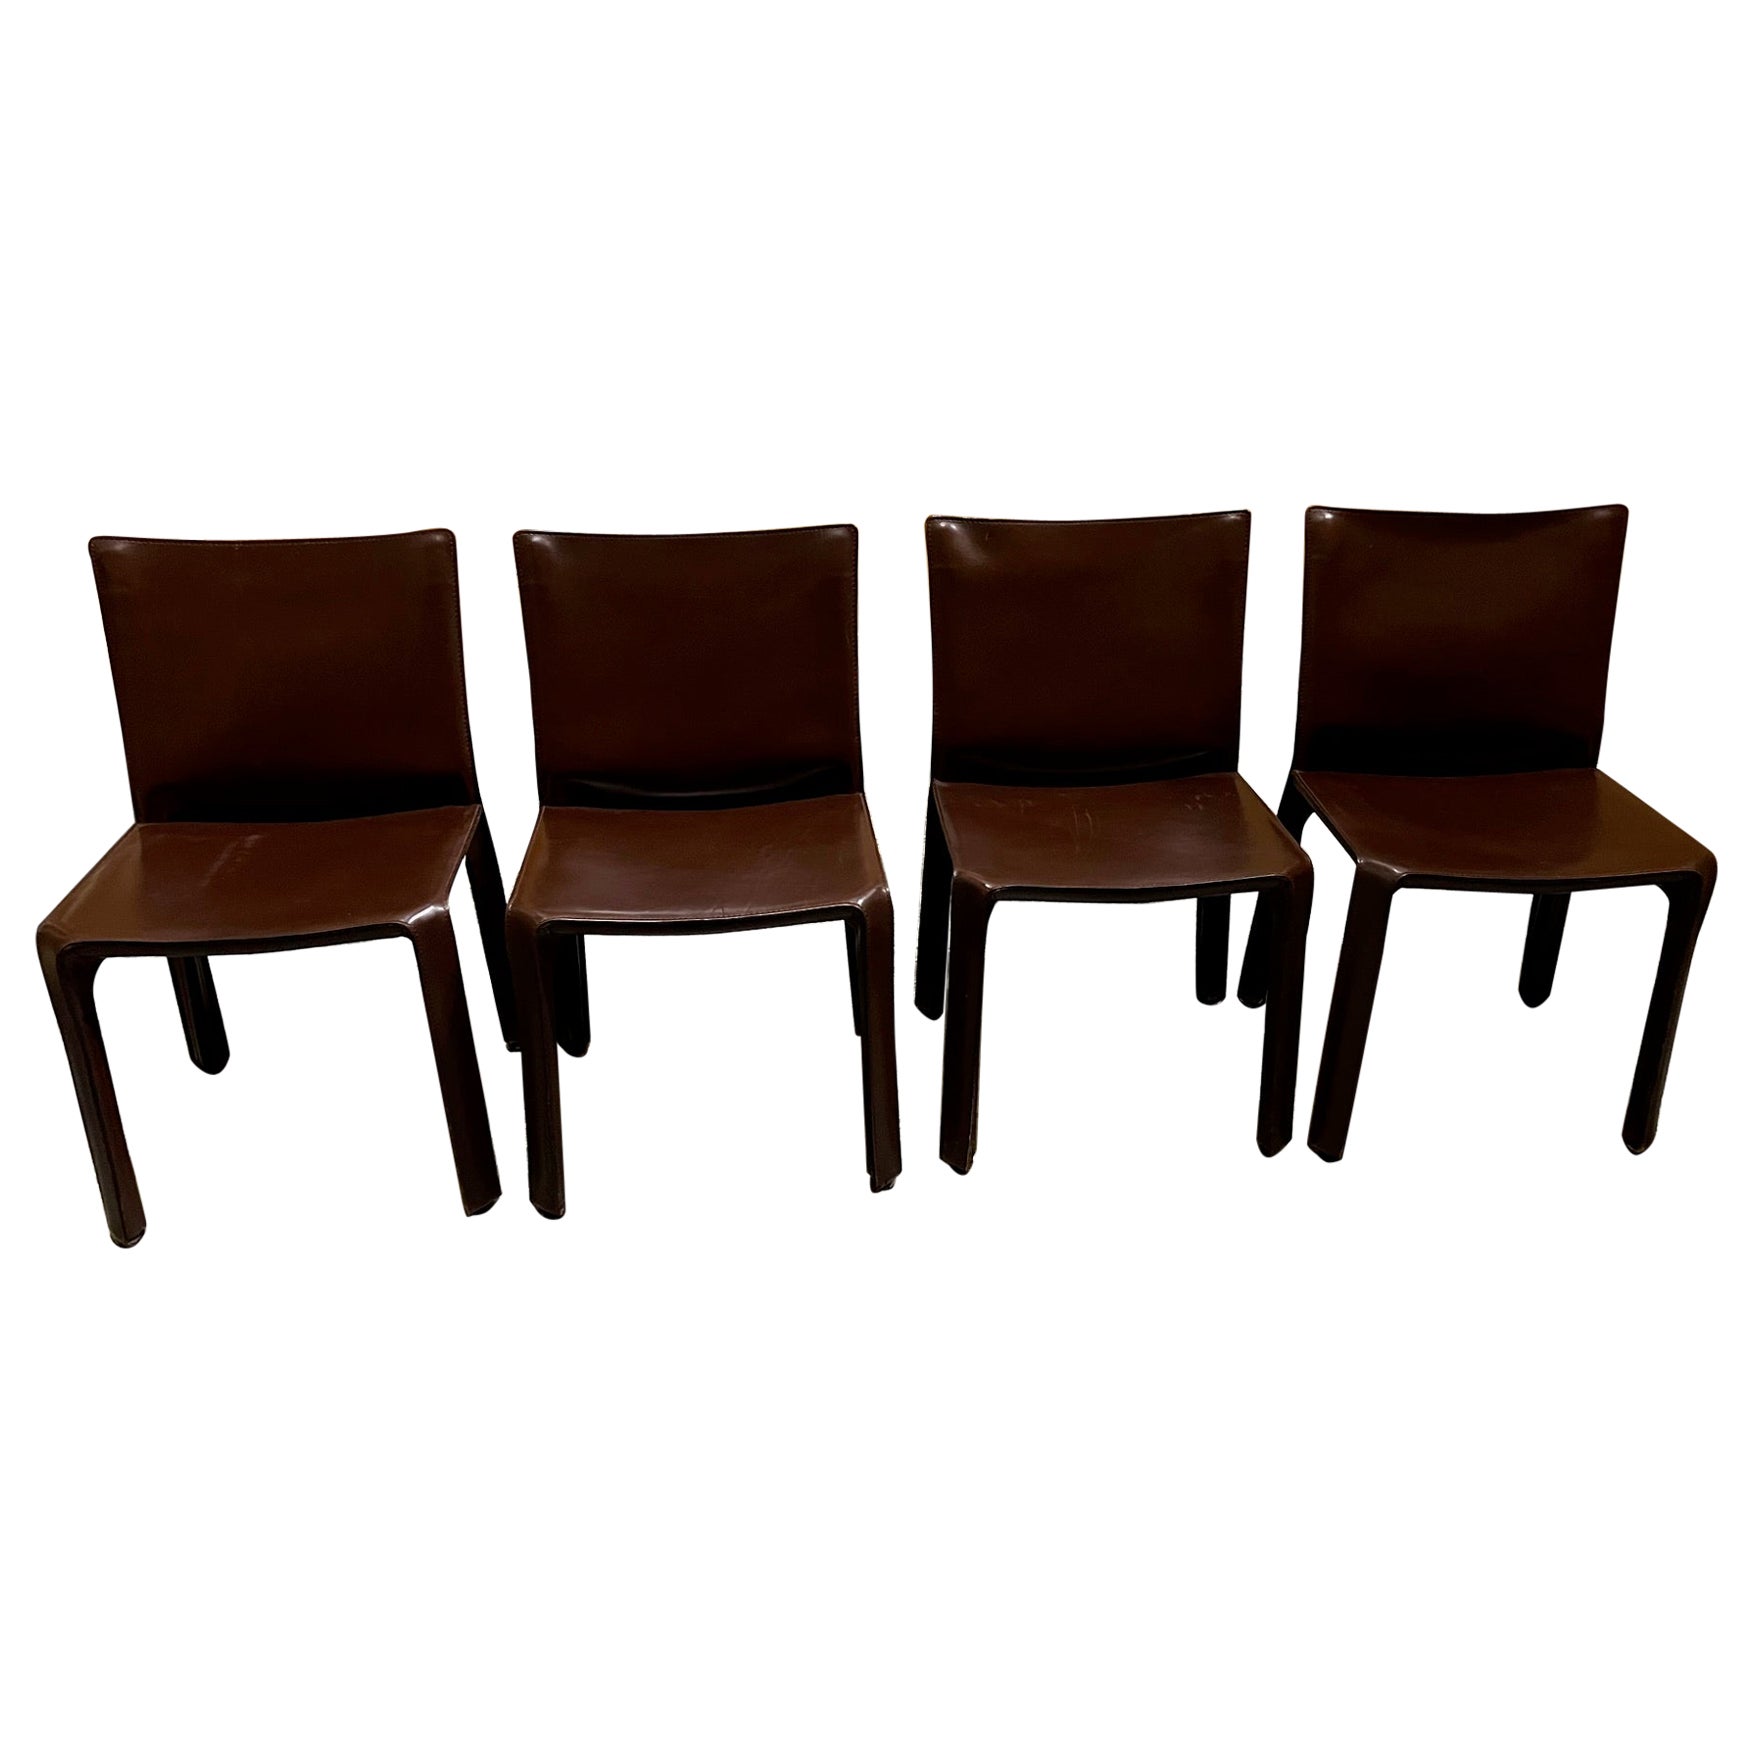 Set of Four Cassina Cab Leather Chairs by Mario Bellini